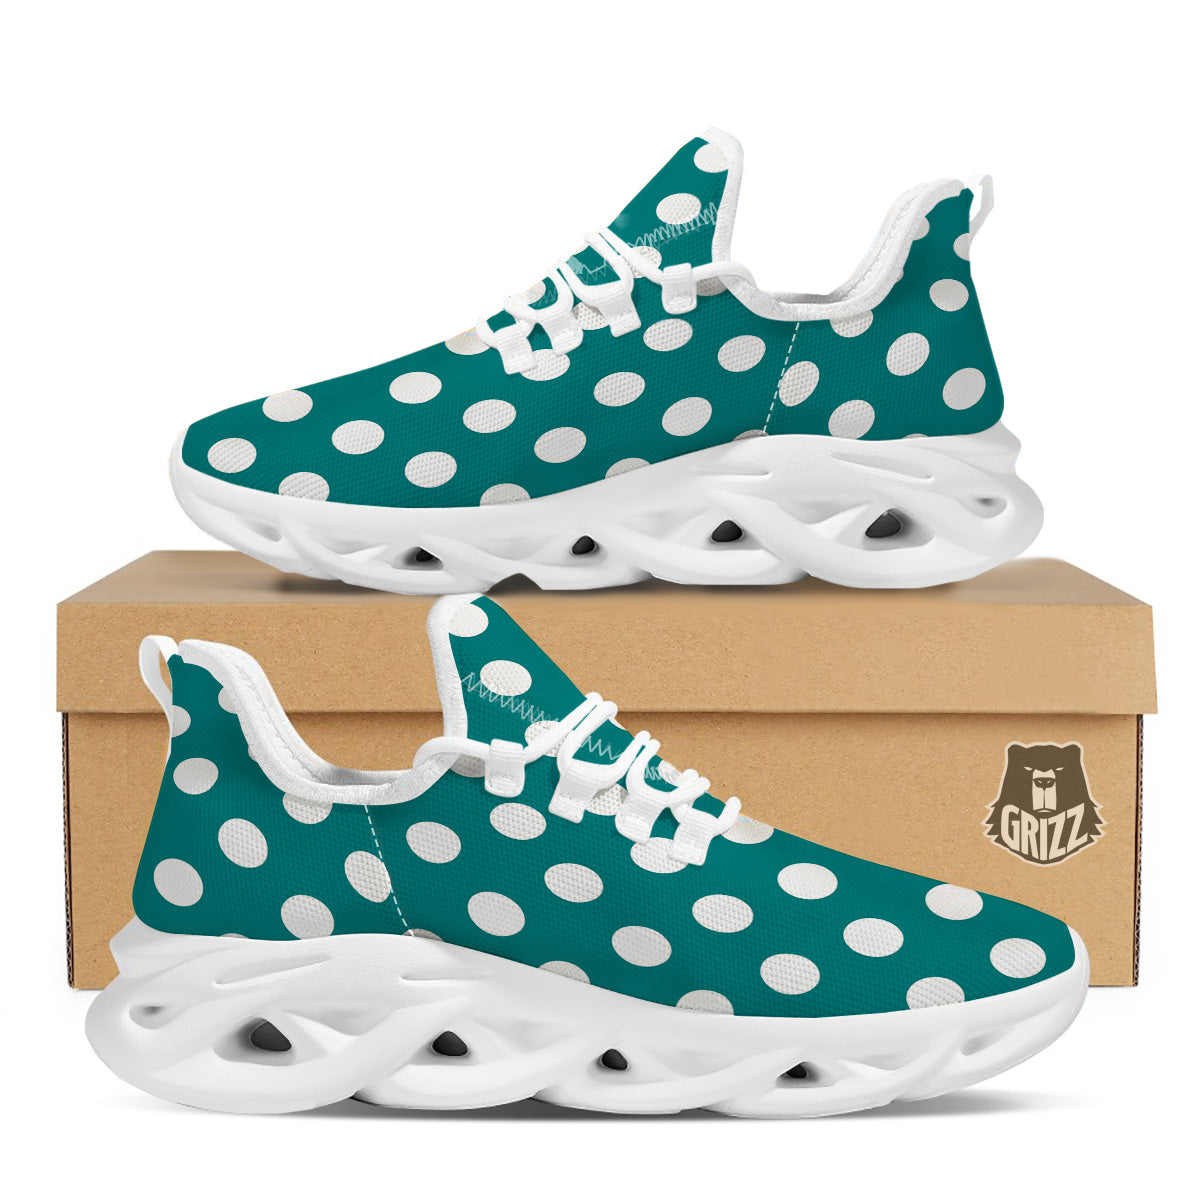 Teal Polka Print Pattern White Running Shoes Grizzshopping